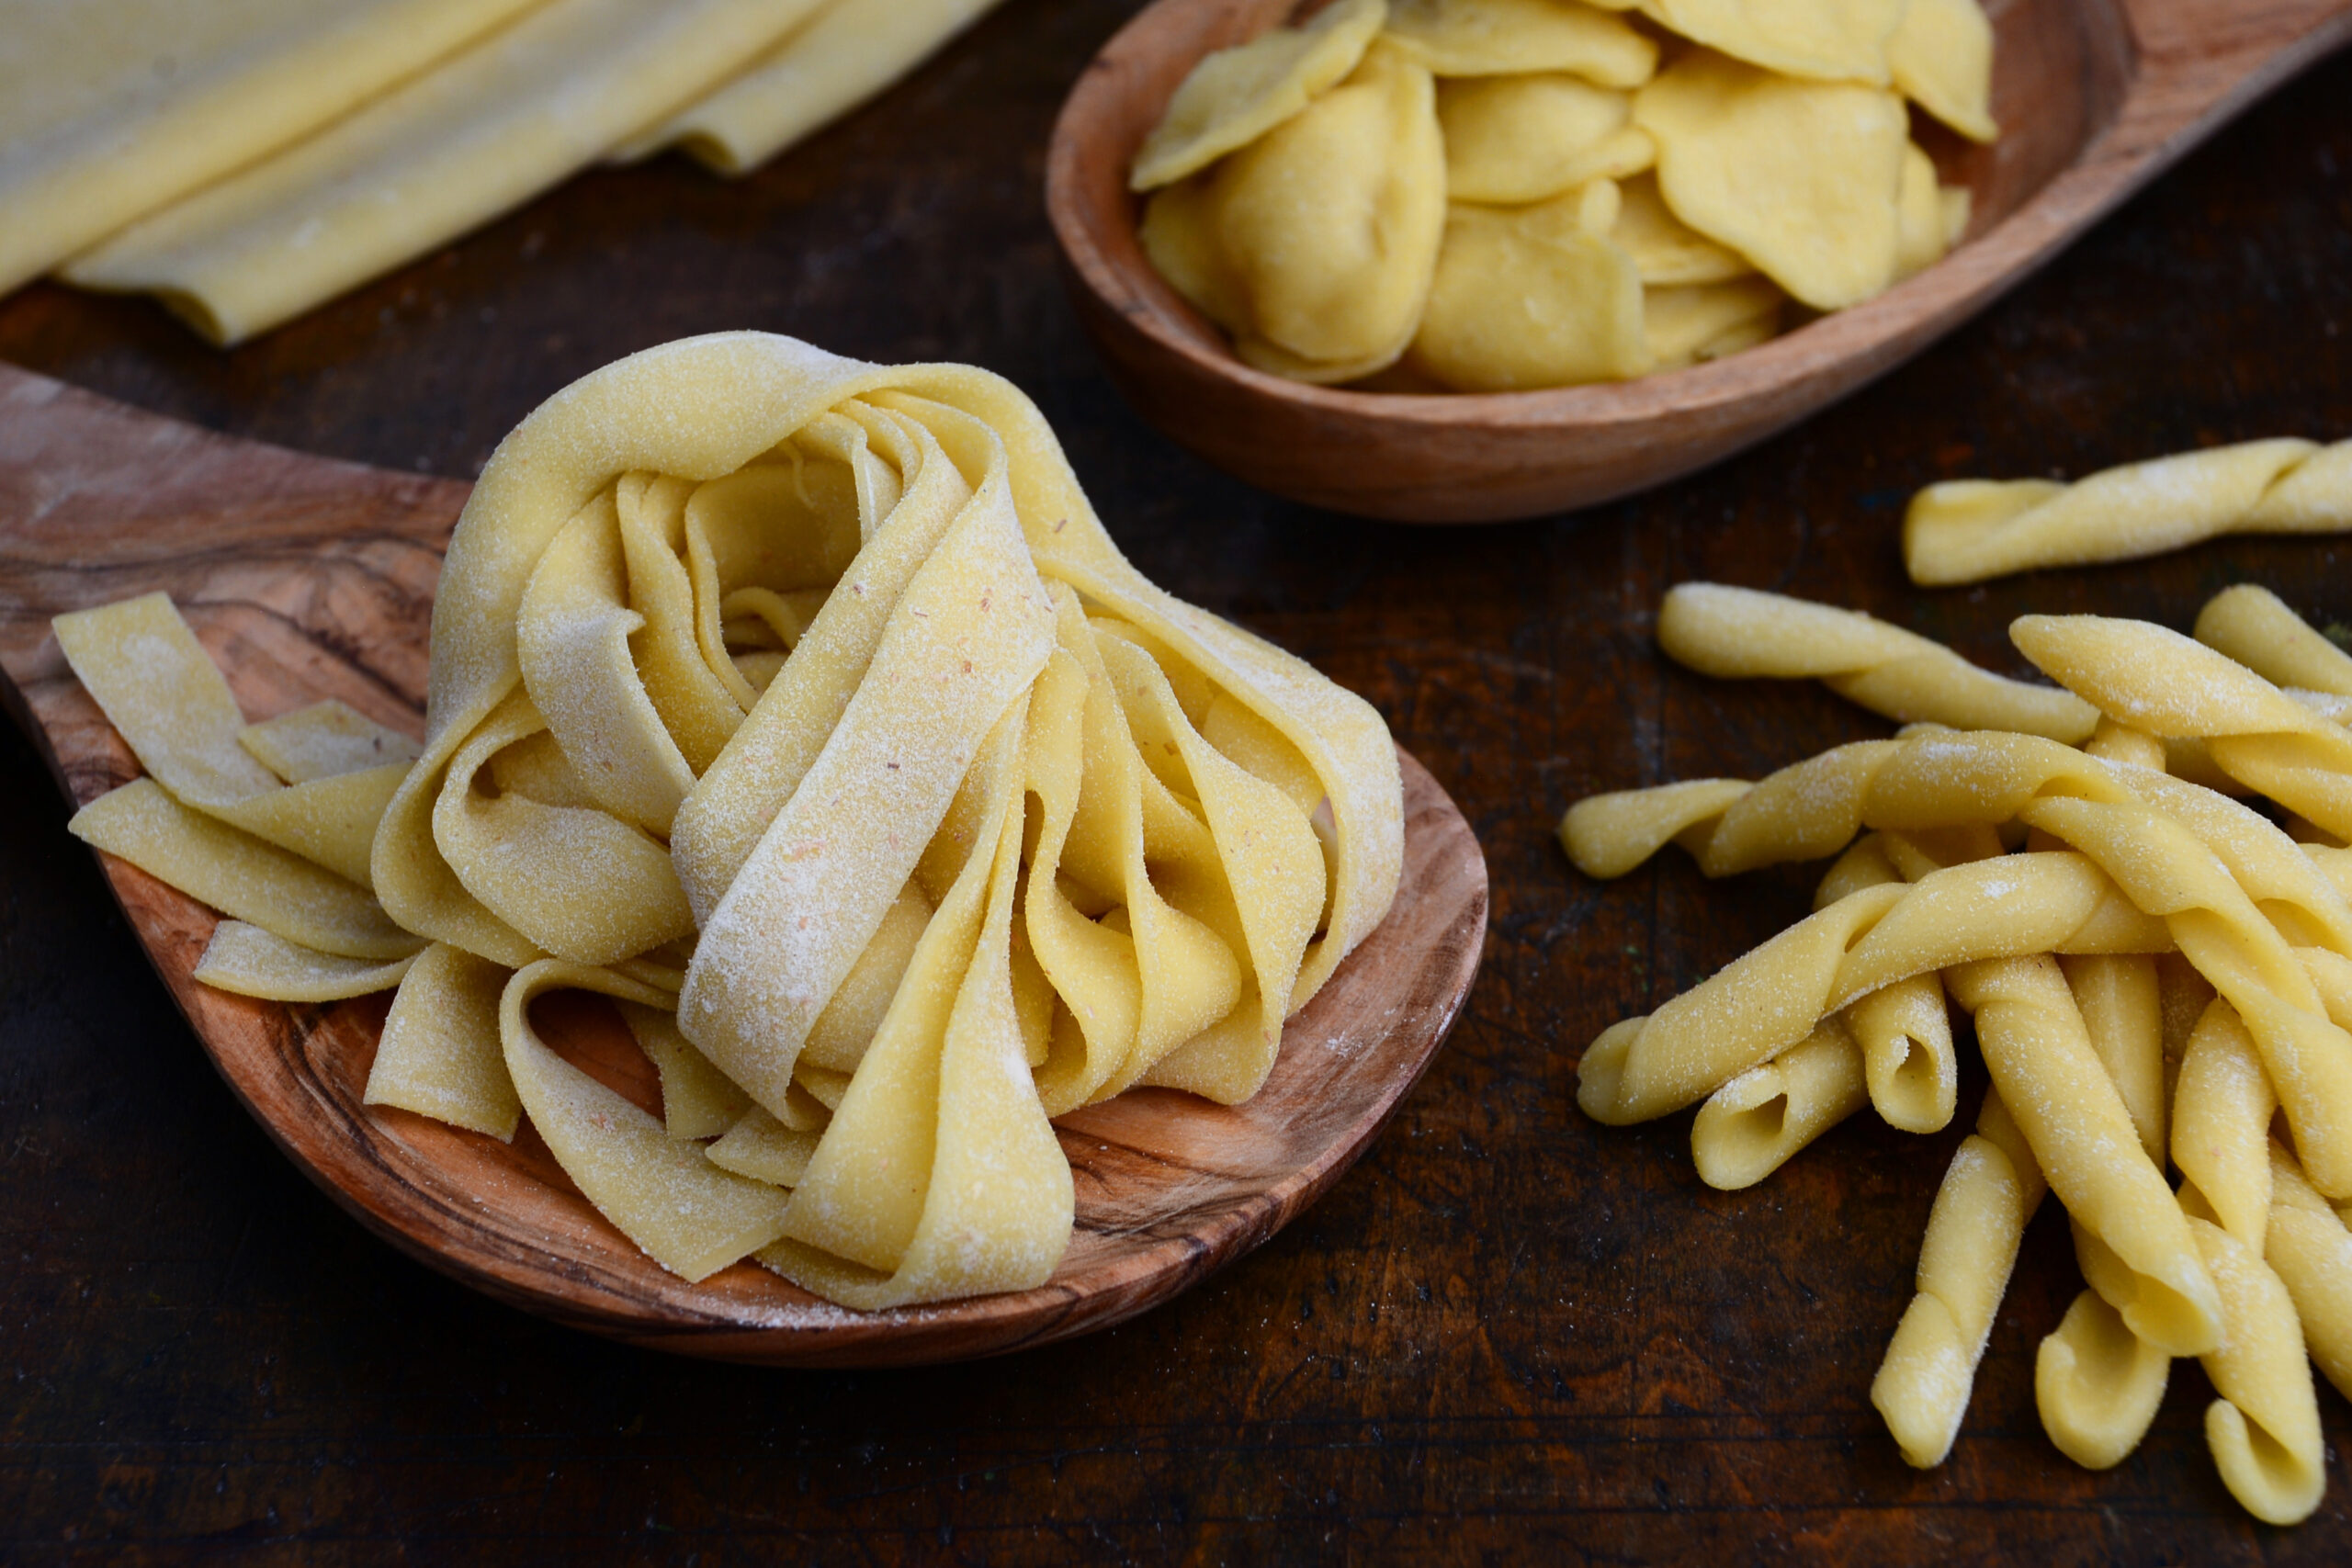 So You Want to Get Into Homemade Pasta